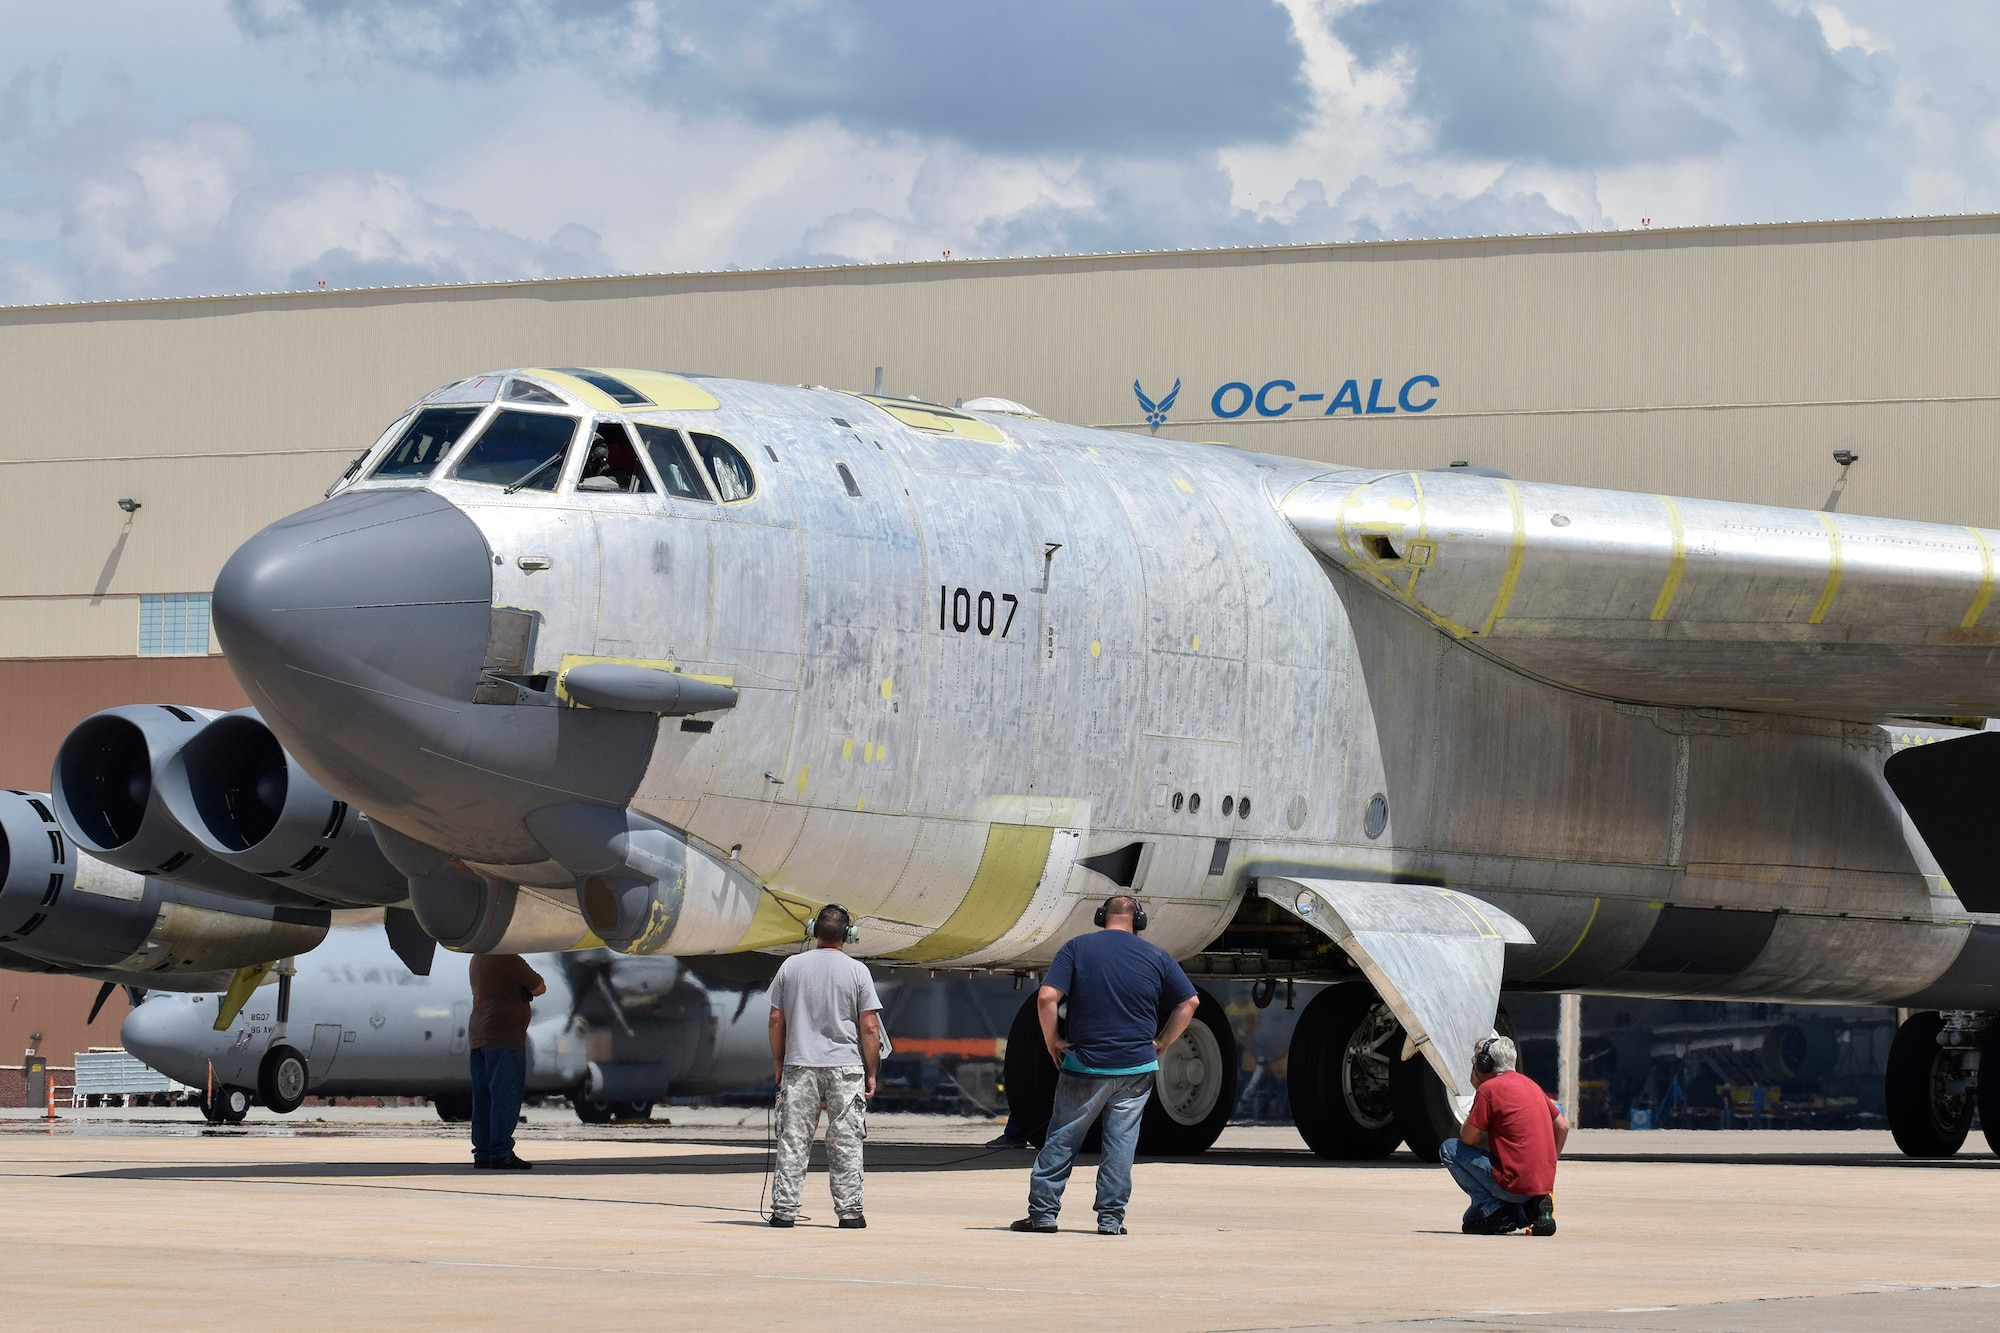 Maintenance personnel from the 565th Aircraft Maintenance Squadron work under and around B-52H 61-0007, 'Ghost Rider,' as the aircraft undergoes checks for an attempted functional test flight at the Oklahoma City Air Logistics Complex, Aug. 29, 2016, Tinker Air Force Base, Okla. 'OC-ALC' can be seen written on the hangar in the background as 'Ghost Rider' shines in natural metal as it completes a 19-month overhaul and upgrade to become the first B-52H to ever be regenerated from long-term storage with the 309th Aerospace Maintenance and Regeneration Group at Davis-Monthan AFB, Ariz., and returned to fully-operational flying status. (U.S. Air Force photo/Greg L. Davis)